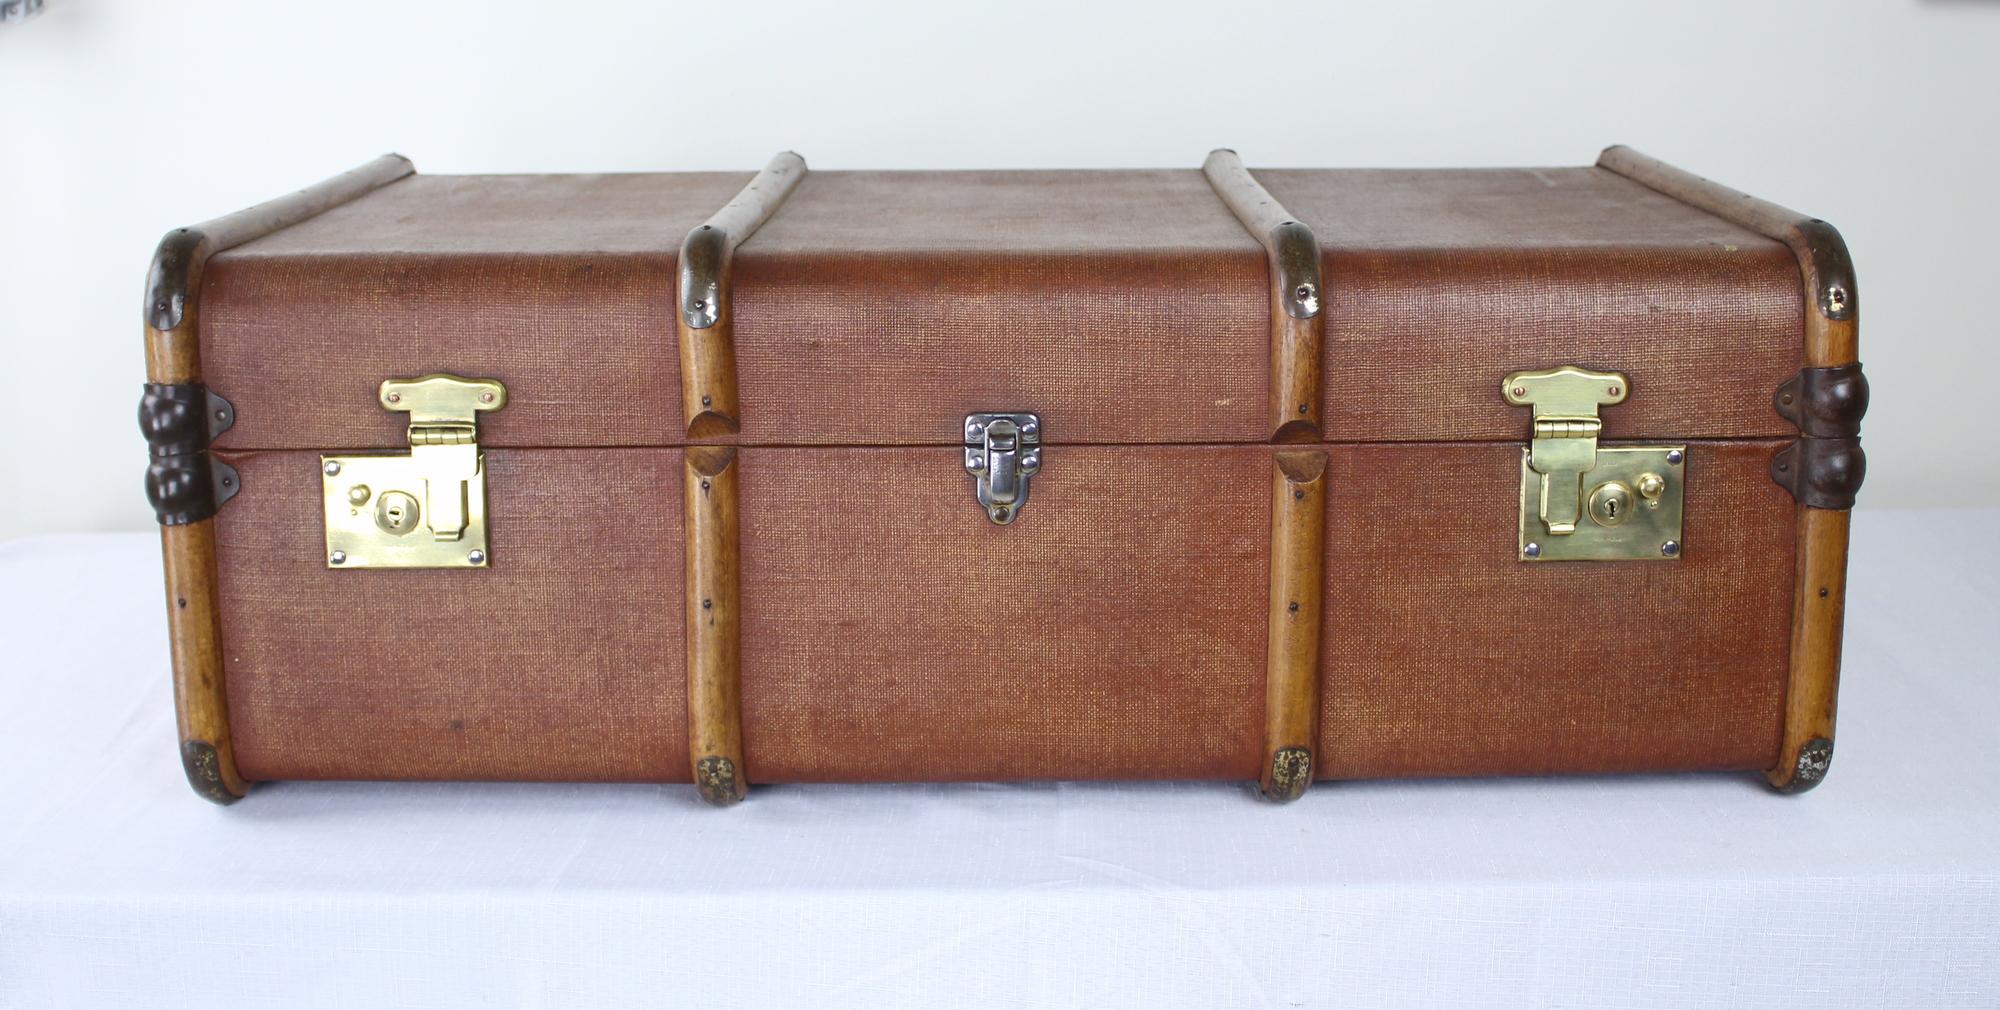 Built to withstand the challenges of long distance travel, this vintage brown steamer trunk is a British design Classic. Whether you are introducing this unique piece in your home as a coffee table or to add vintage style to a room, this travel